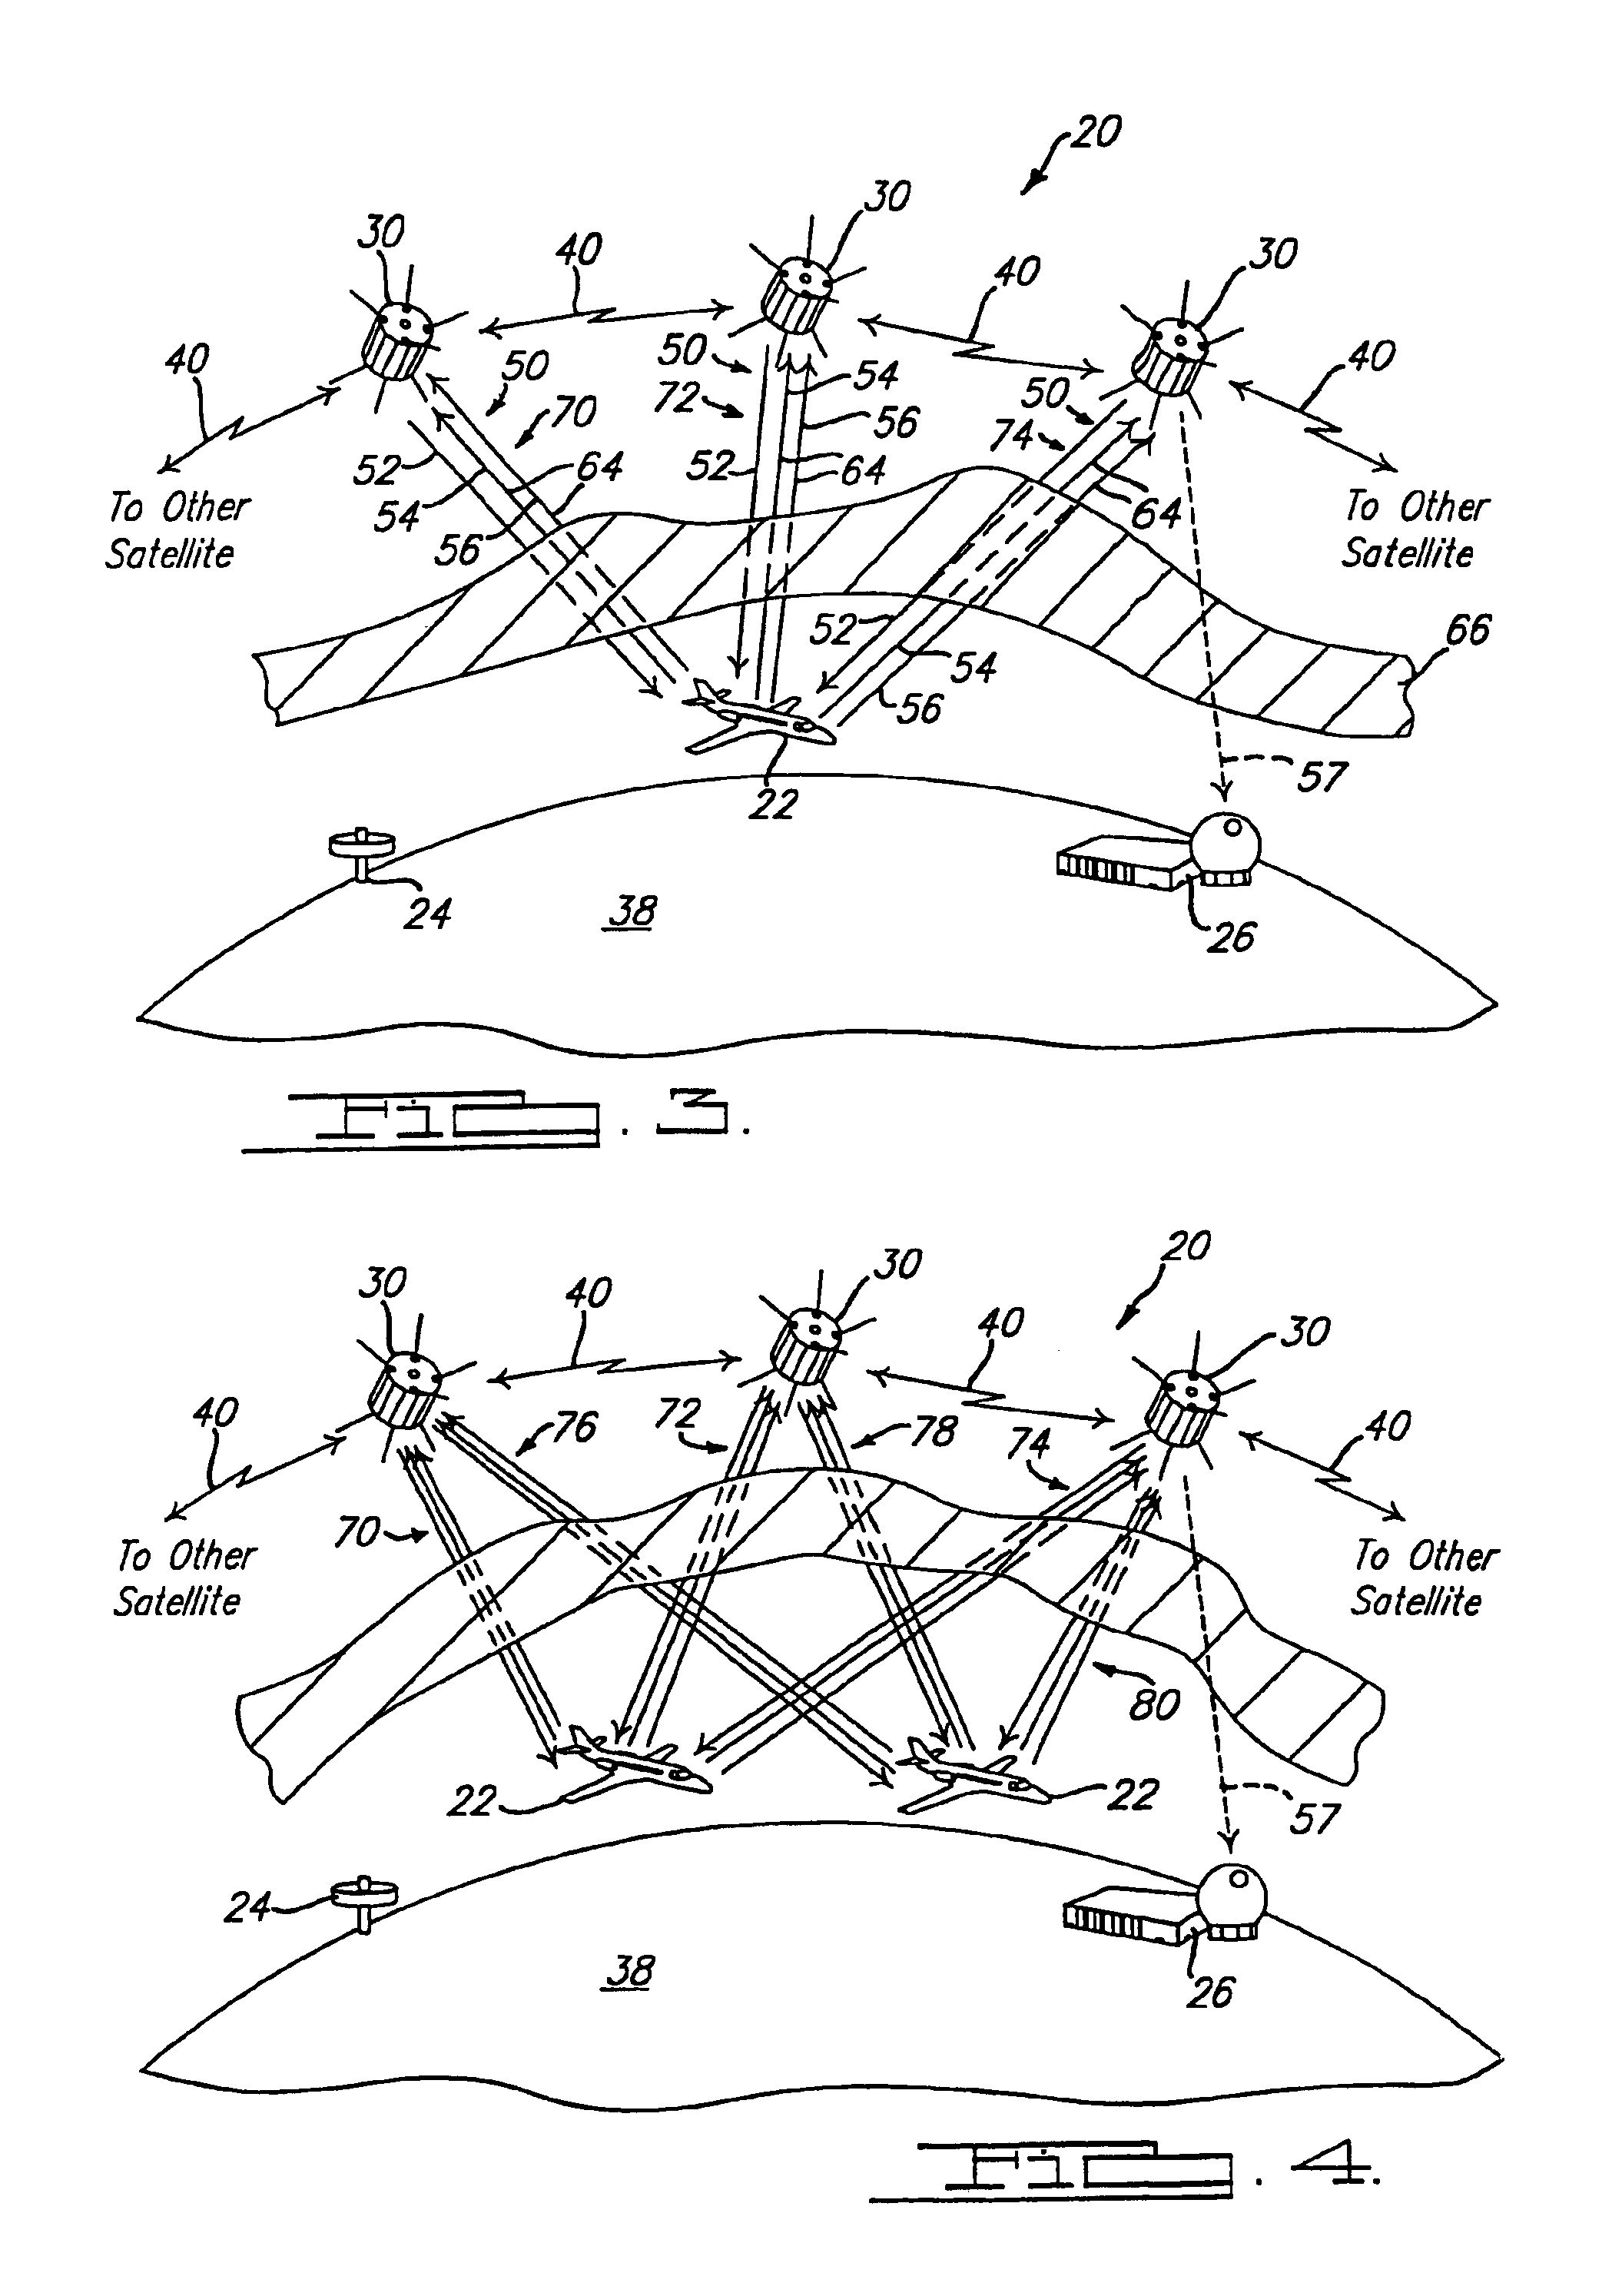 Method and apparatus for providing an integrated communications, navigation and surveillance satellite system